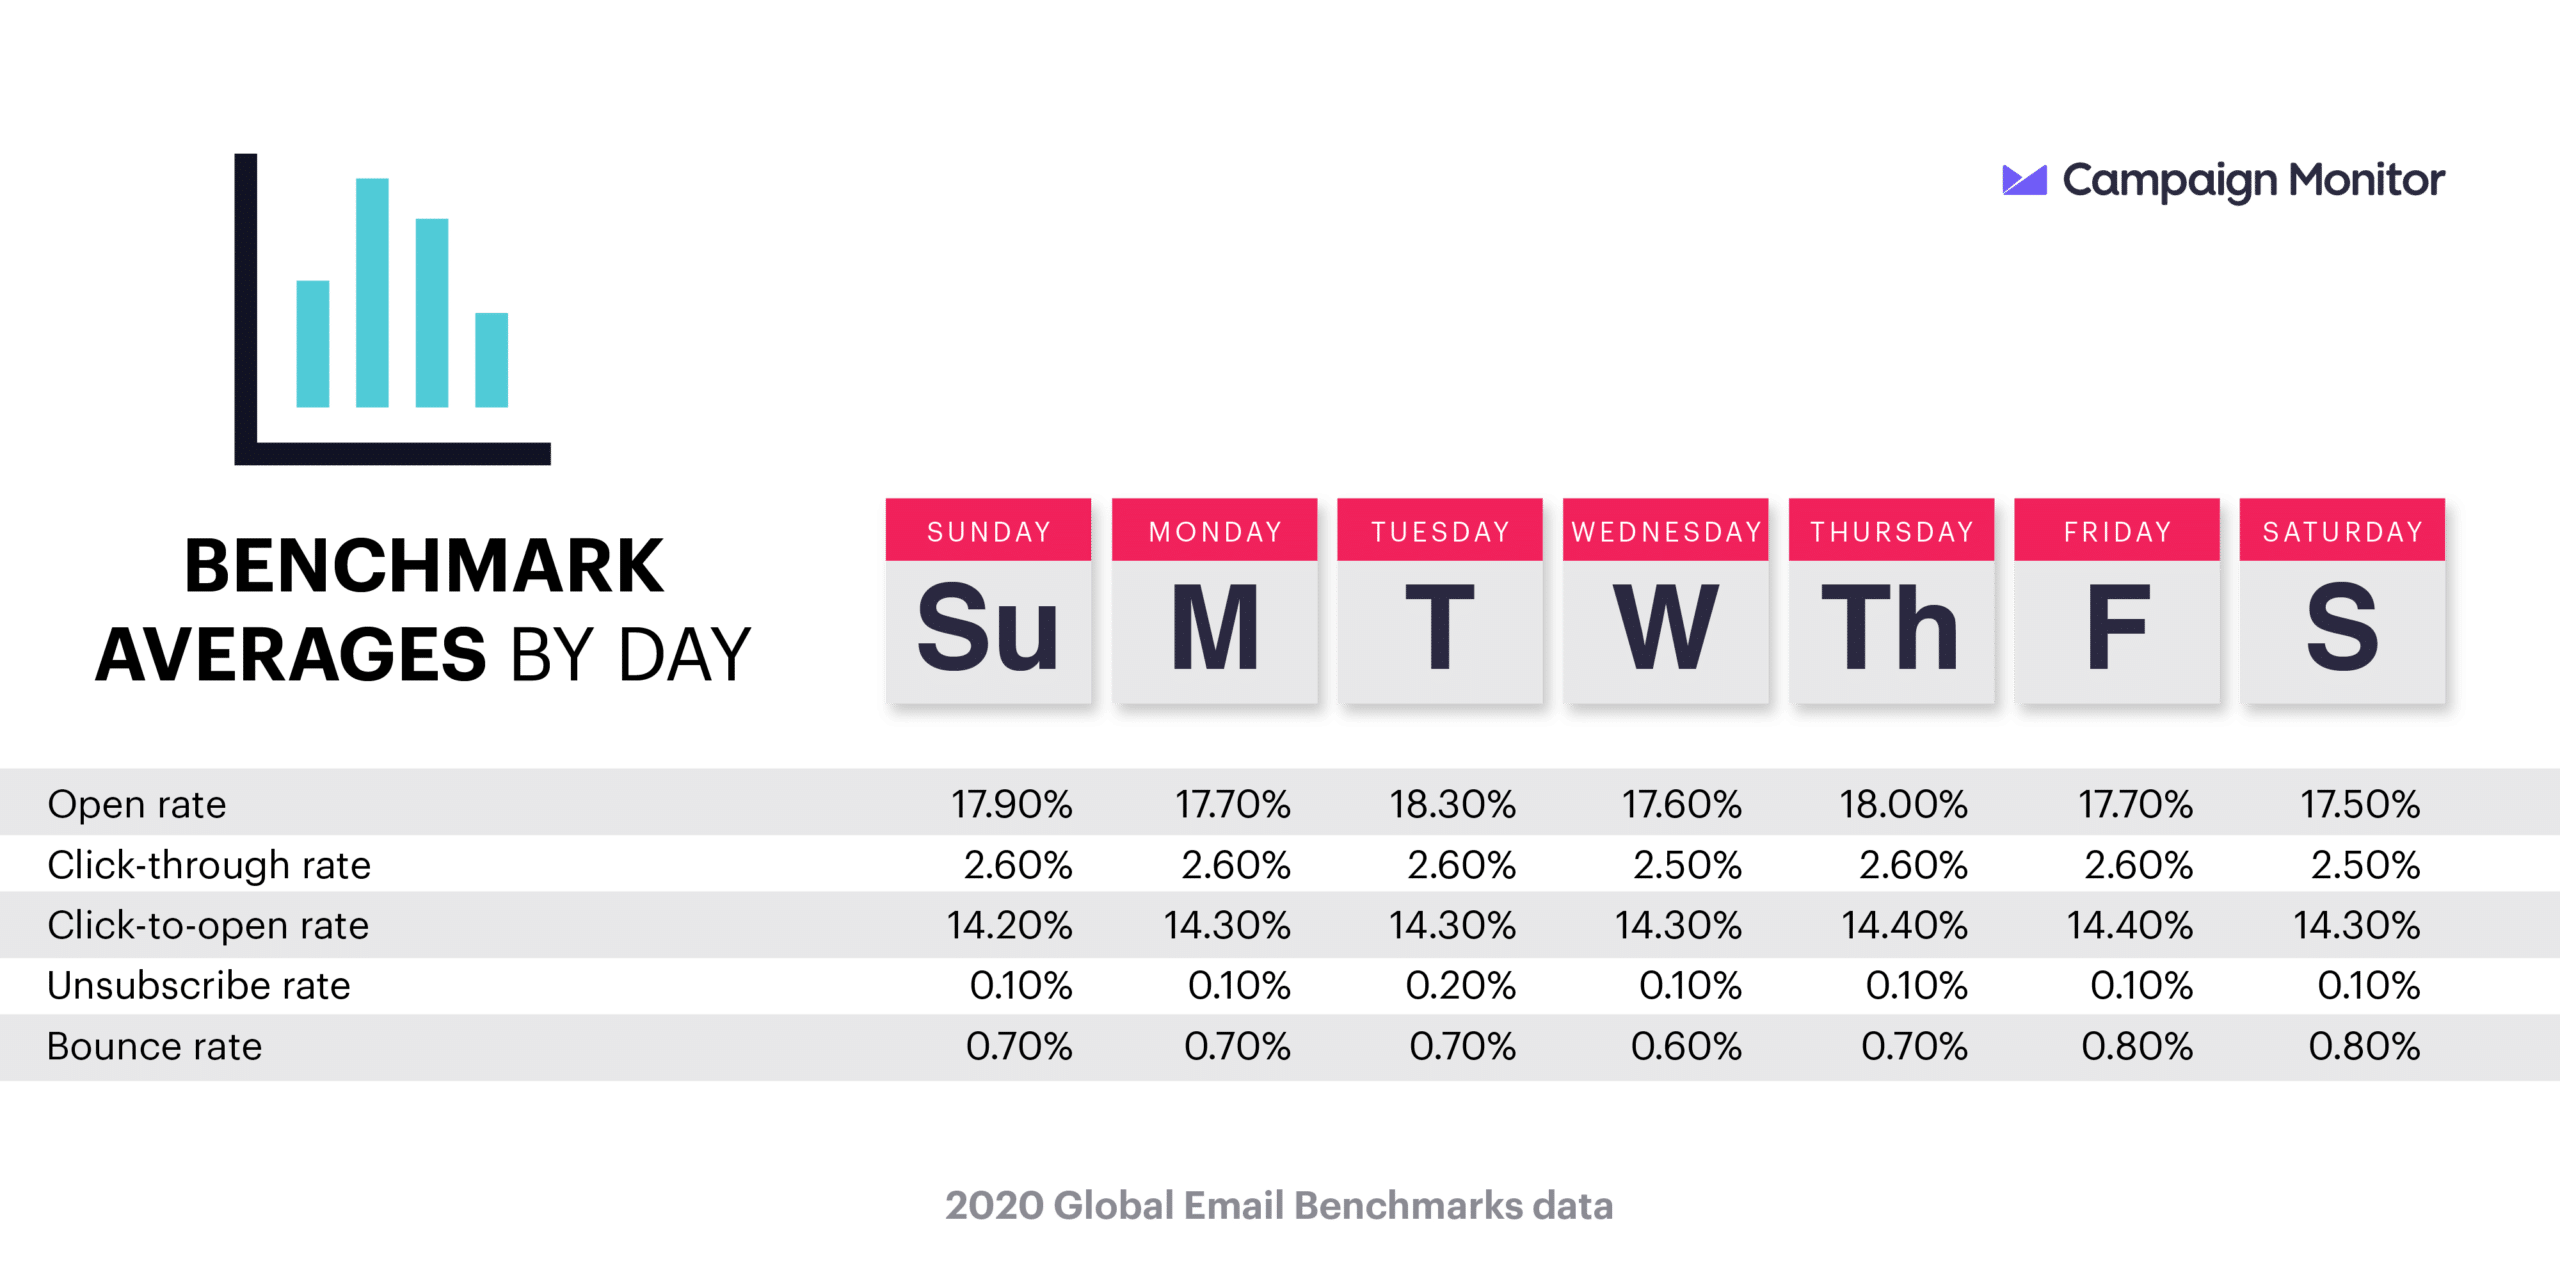 2020 Global email benchmarks chart showing averages by day